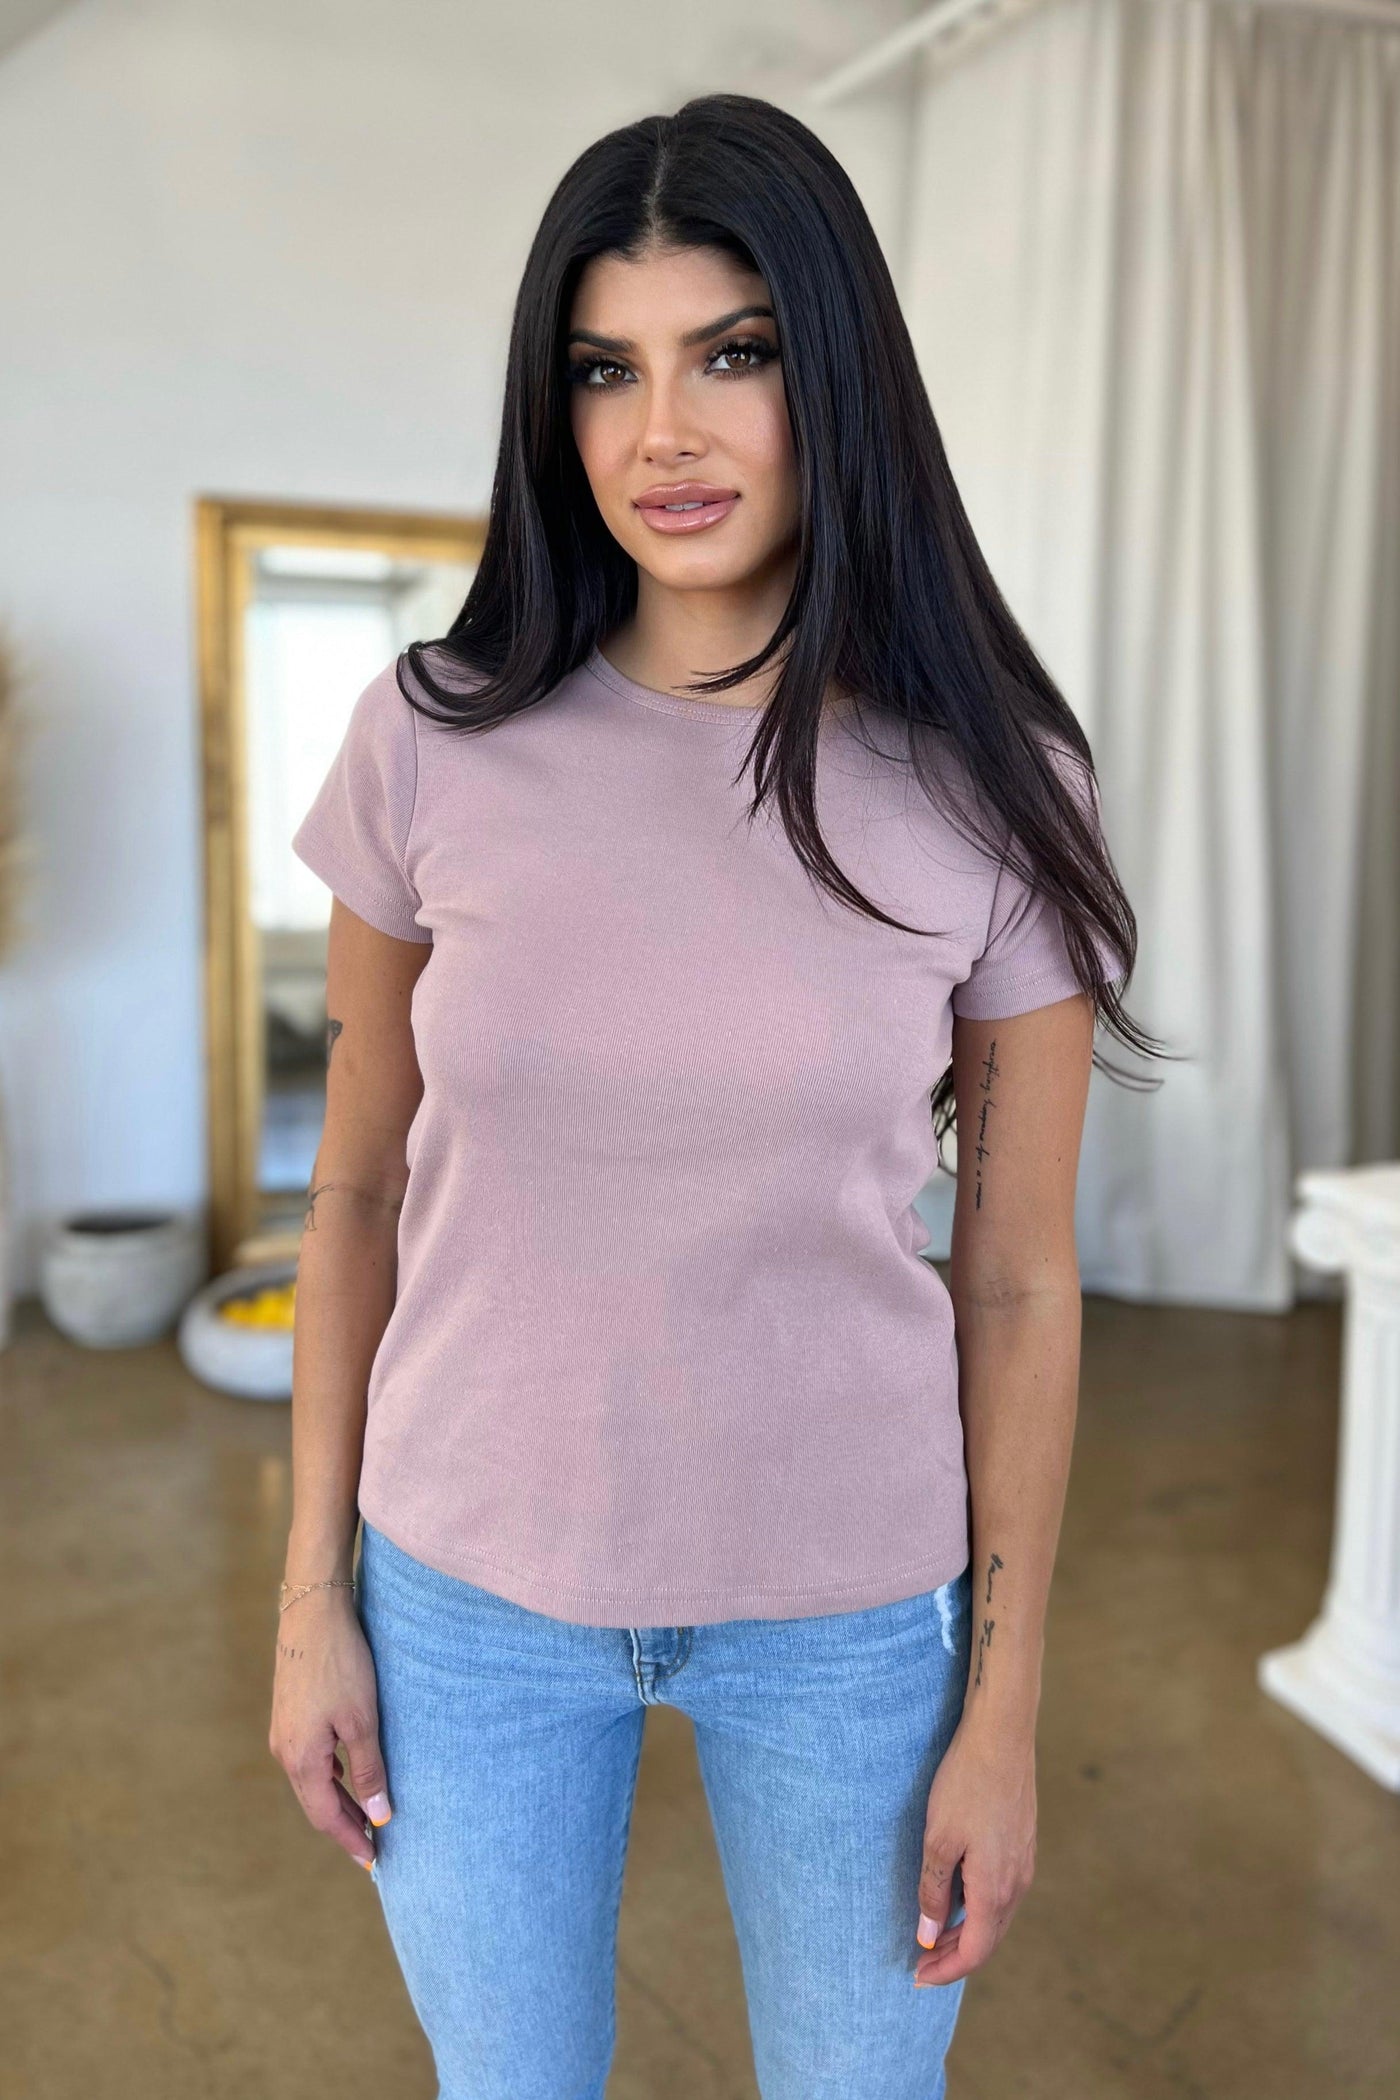 LEXI TEE , T-SHIRT , It's NOMB , CLASSIC FIT COTTON TEE, LEXI TEE, MAUVE SHIRT, PINK TEE, THREAD AND SUPPLY LEXI TEE, WOMEN'S CLASSIC FIT TEE , It's NOMB , itsnomb.com